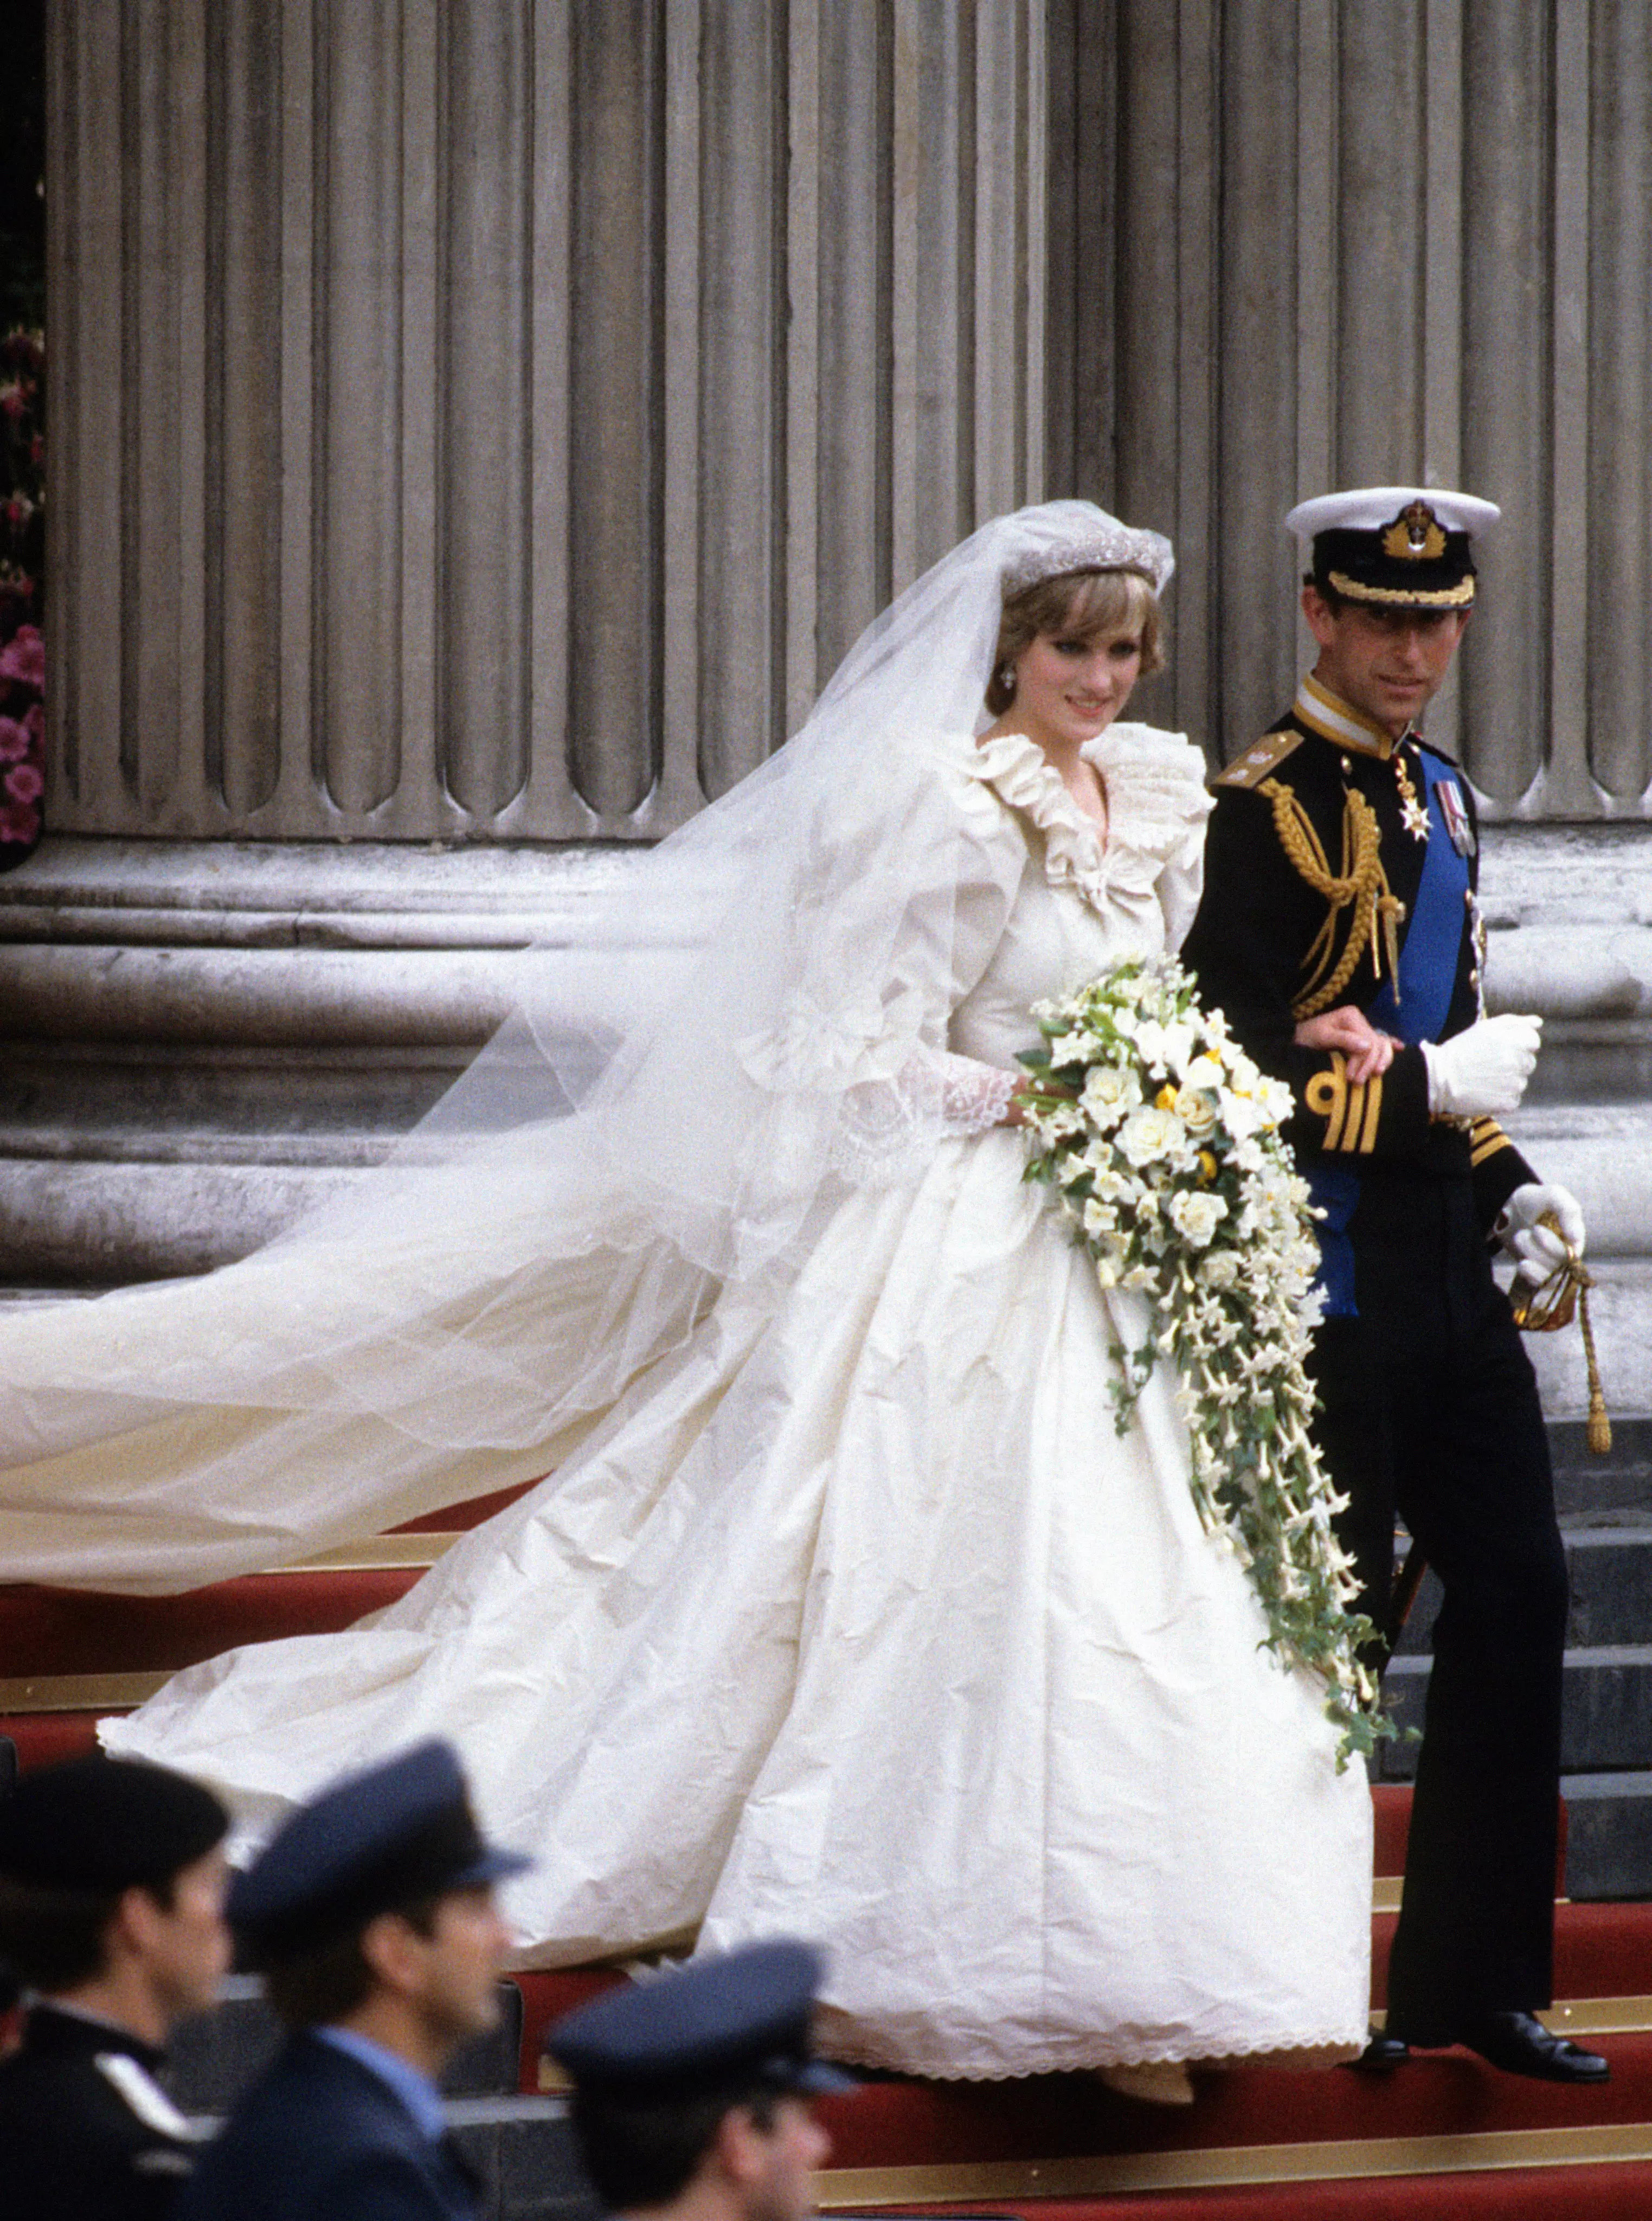 We are expecting to see Prince Charles and Diana's wedding in Season 4. (